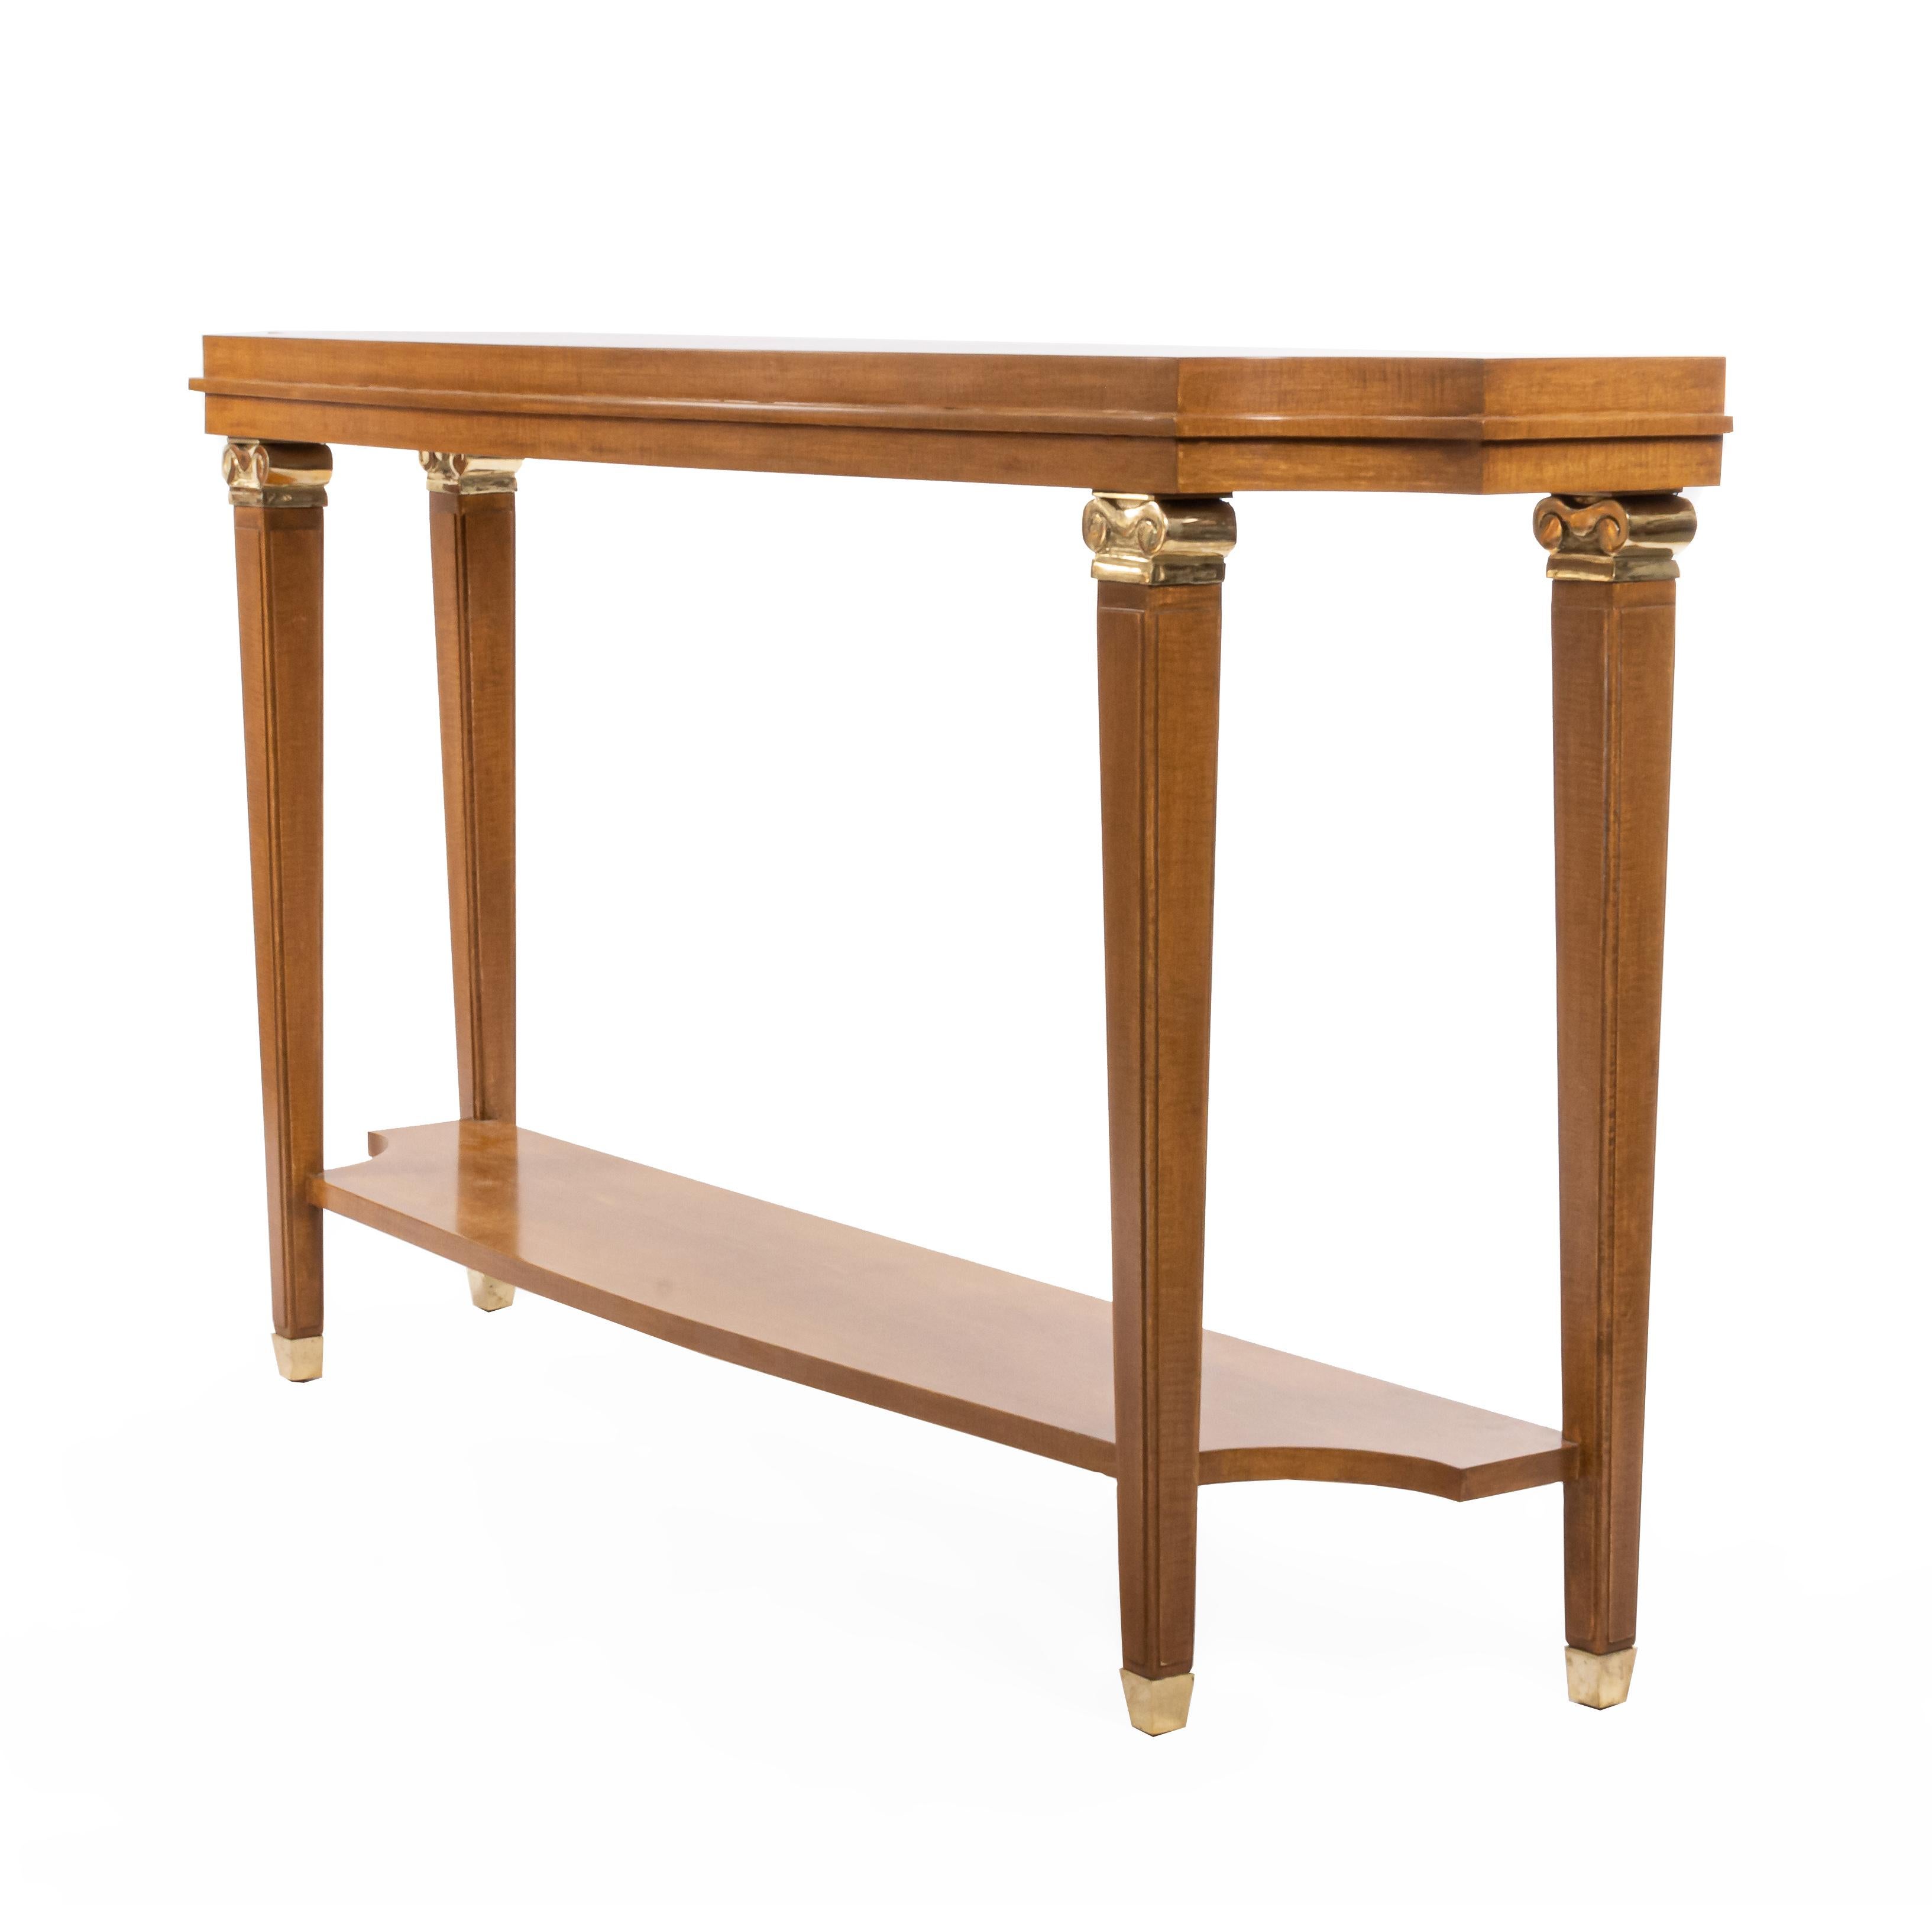 French 1940s Lucien Rollin-style sycamore shaped top console table with shelf and bronze capital trim on legs.